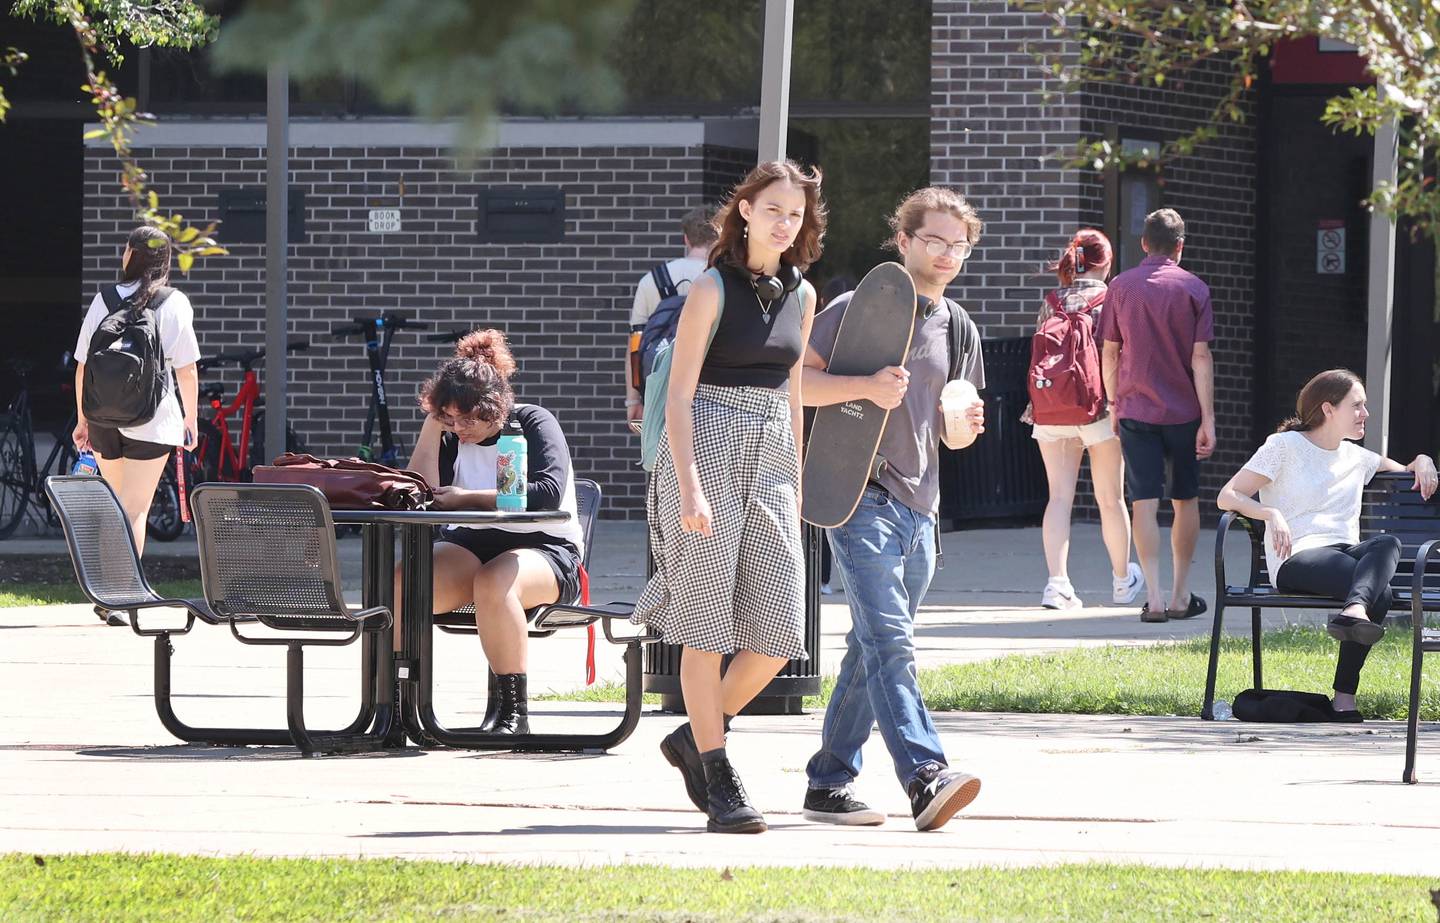 Northern Illinois University students move between classes Wednesday, Aug. 24, 2022, on campus at NIU in DeKalb.